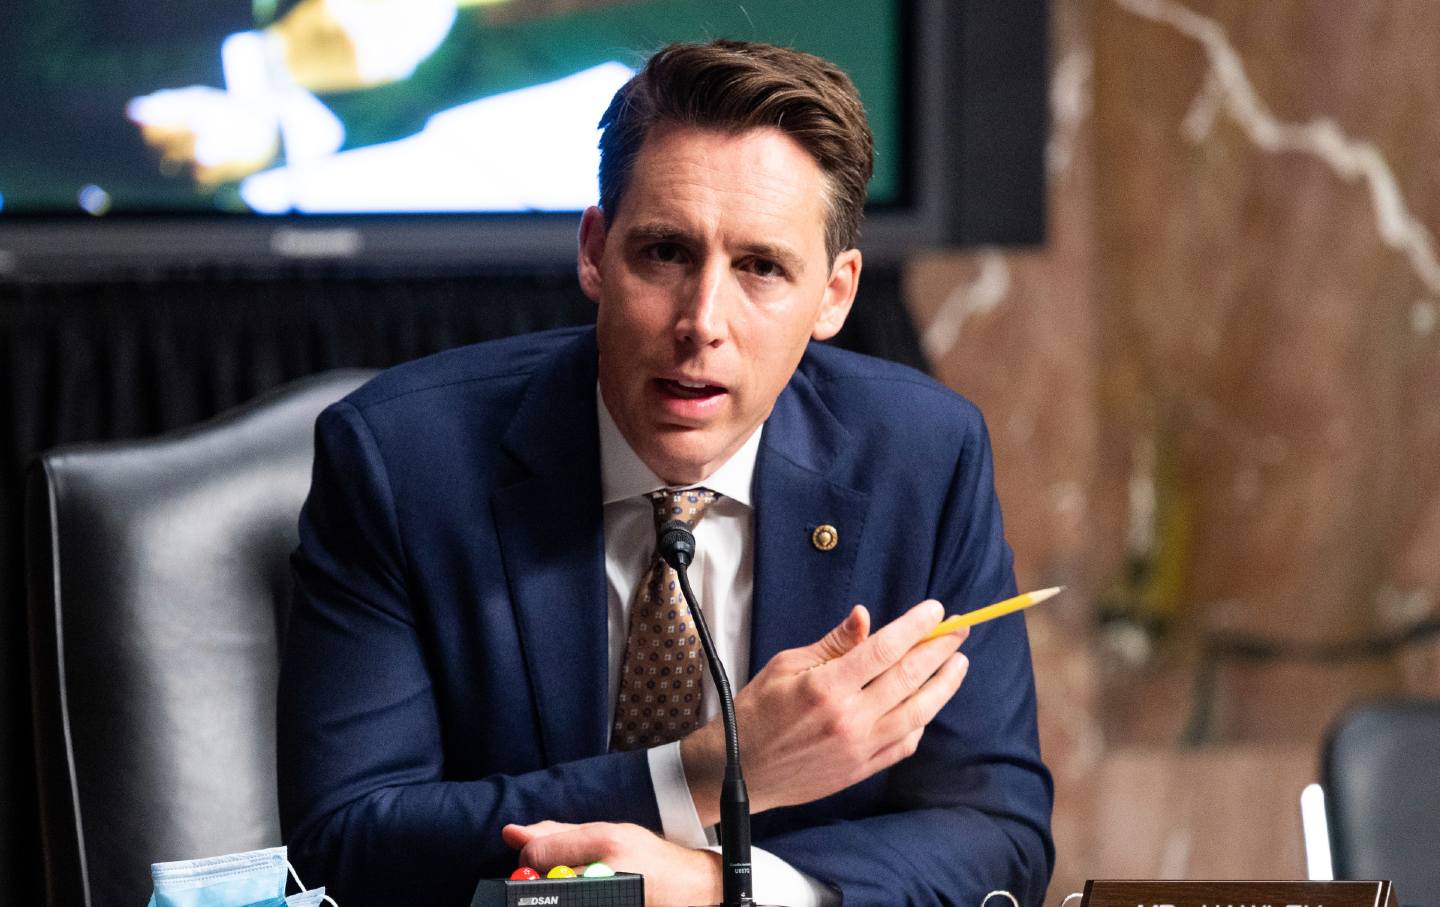 Josh Hawley holding pencil in front of microphone